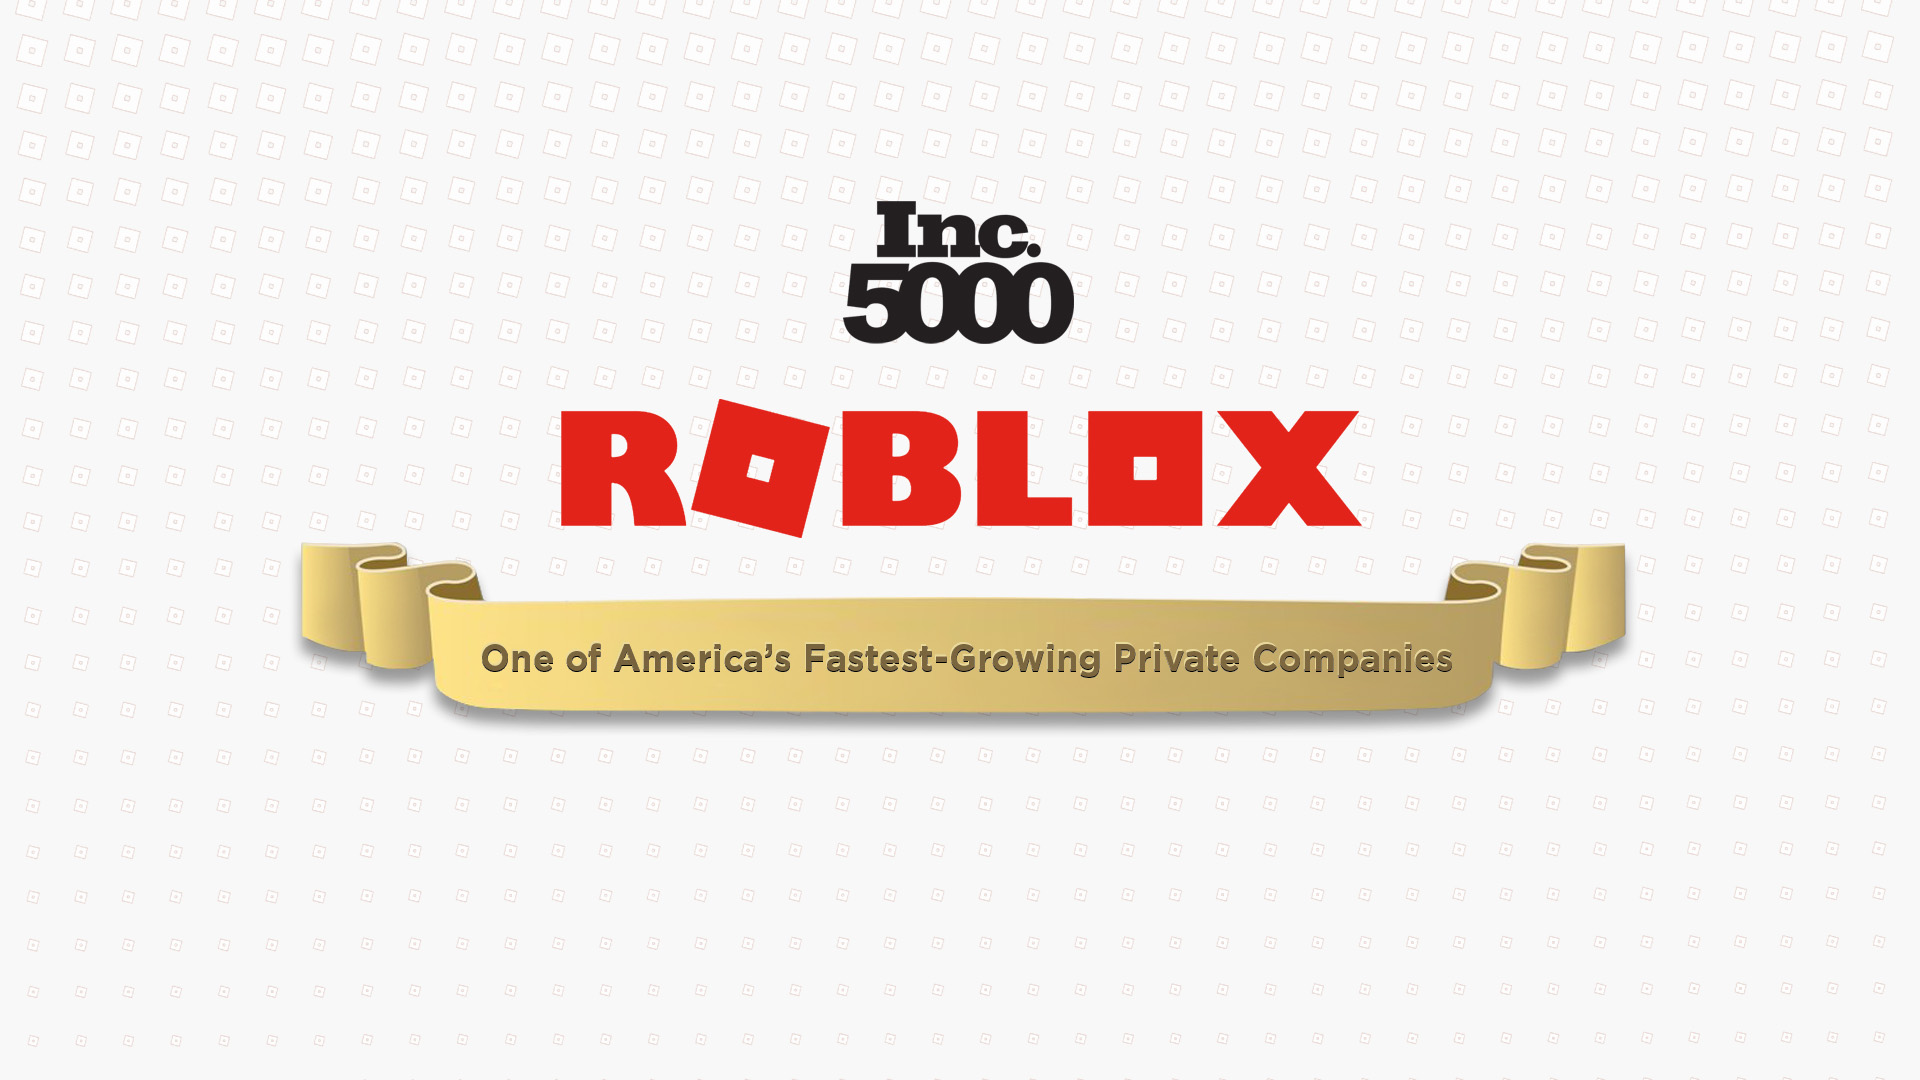 Roblox Achieves Inc 5000 Ranking For 2nd Consecutive Year